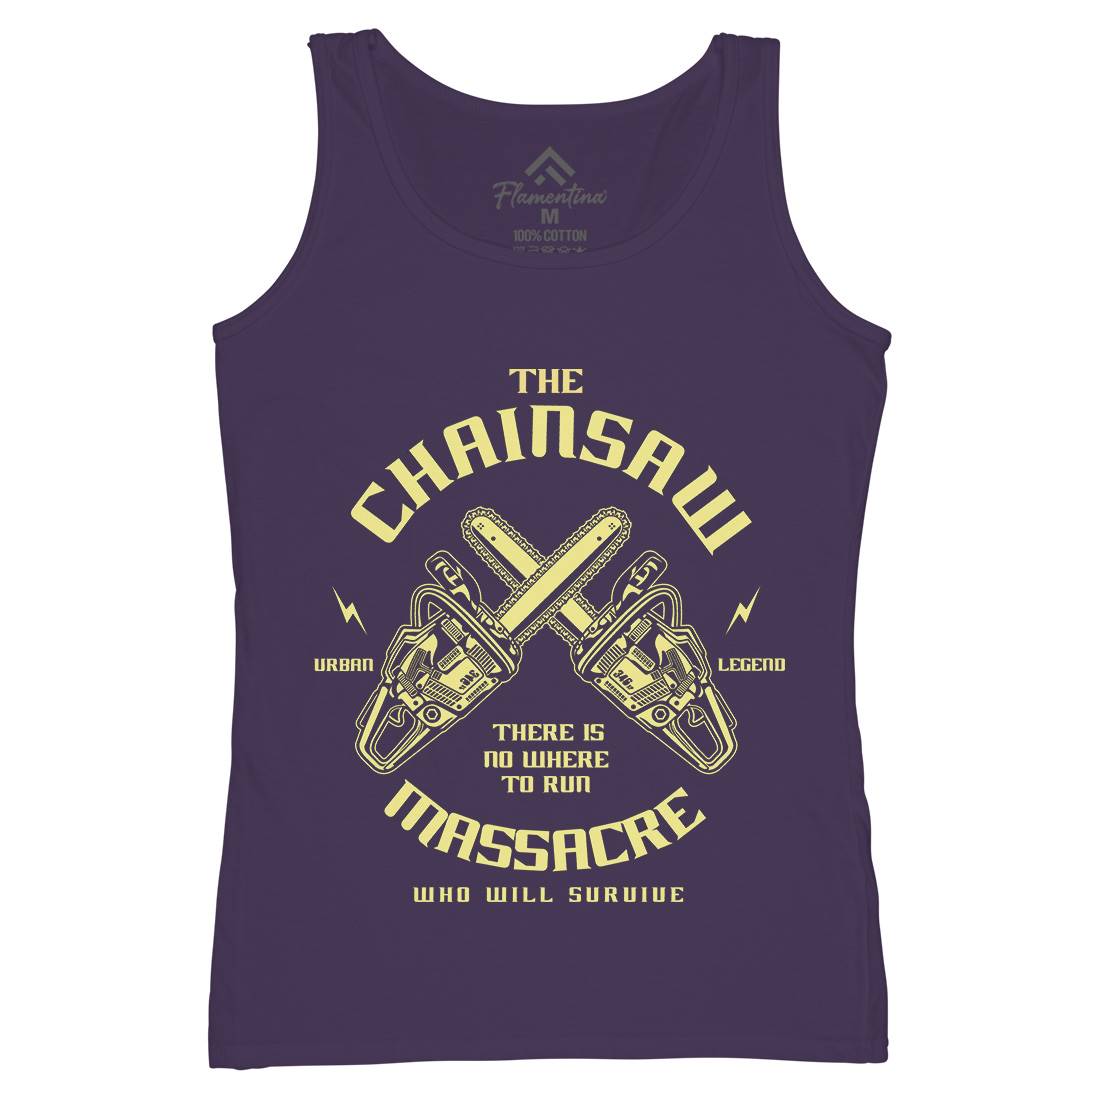 Chainsaw Womens Organic Tank Top Vest Horror A029